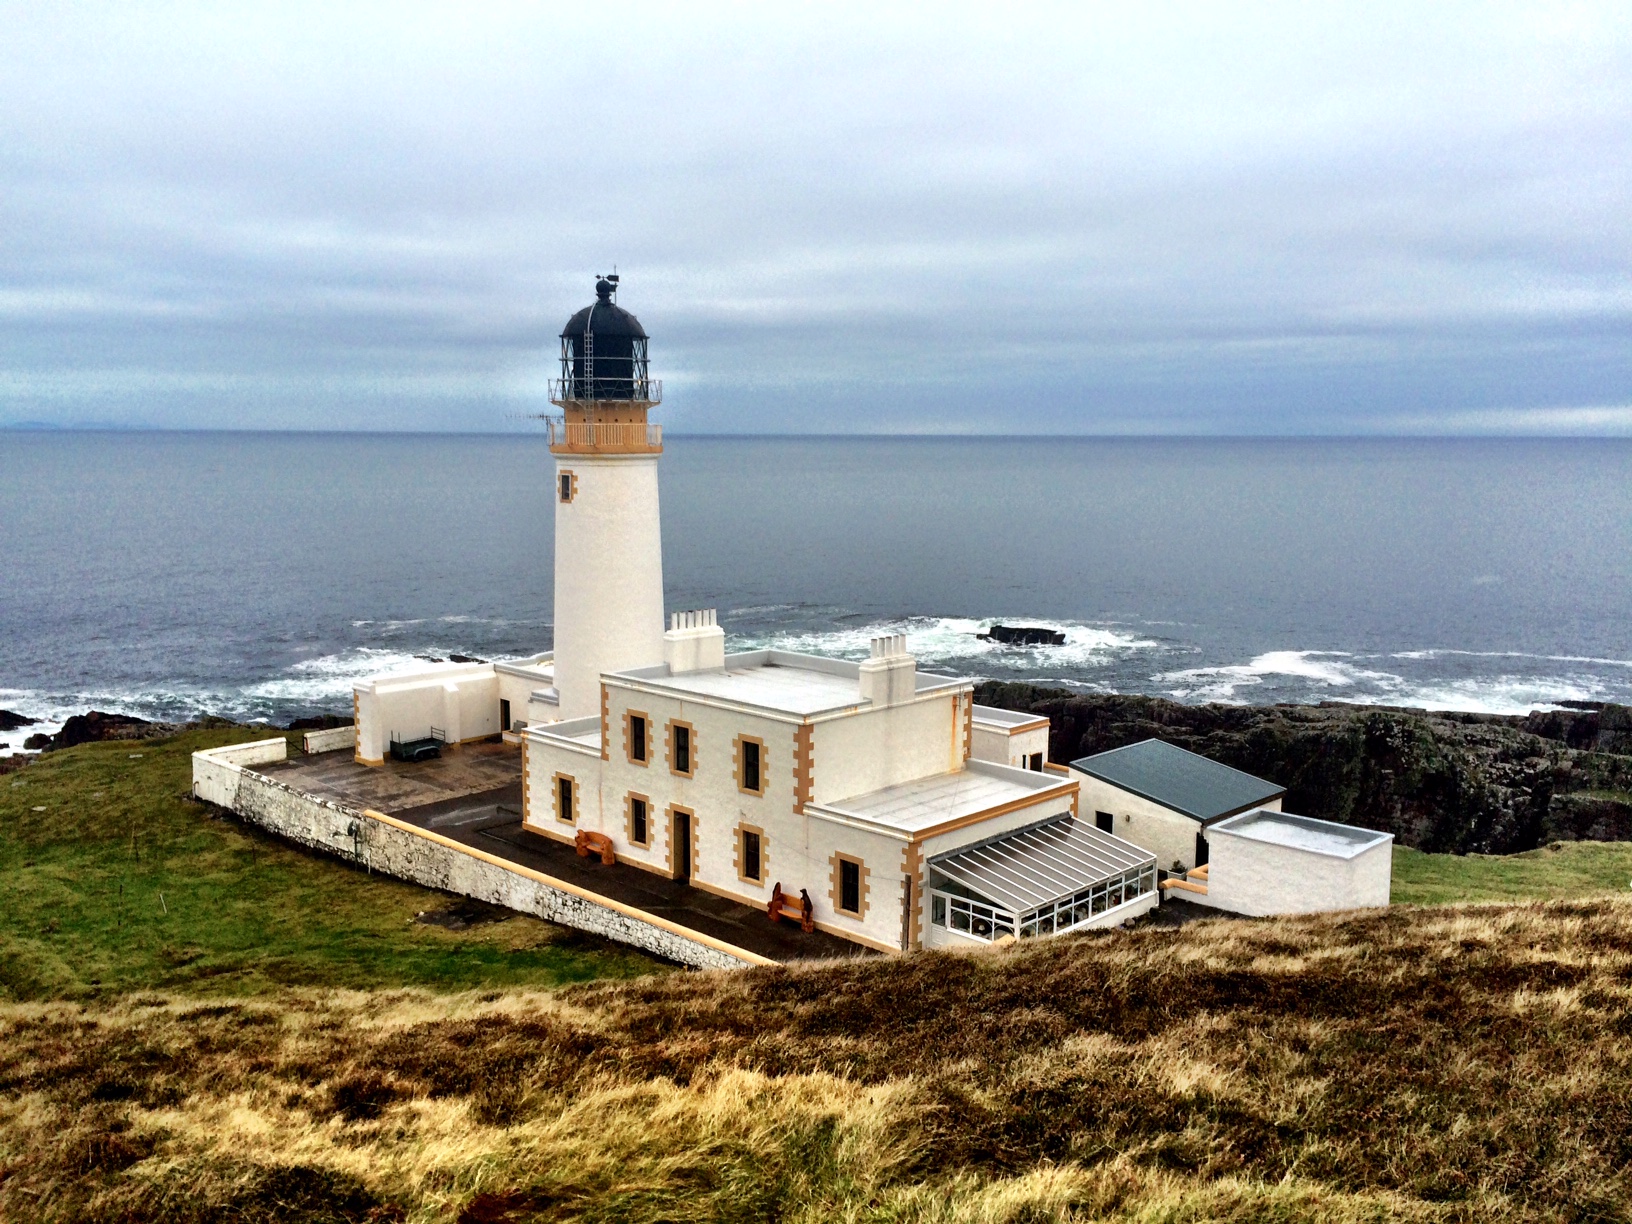 Melvaig and the Rubha Reidh Lighthouse